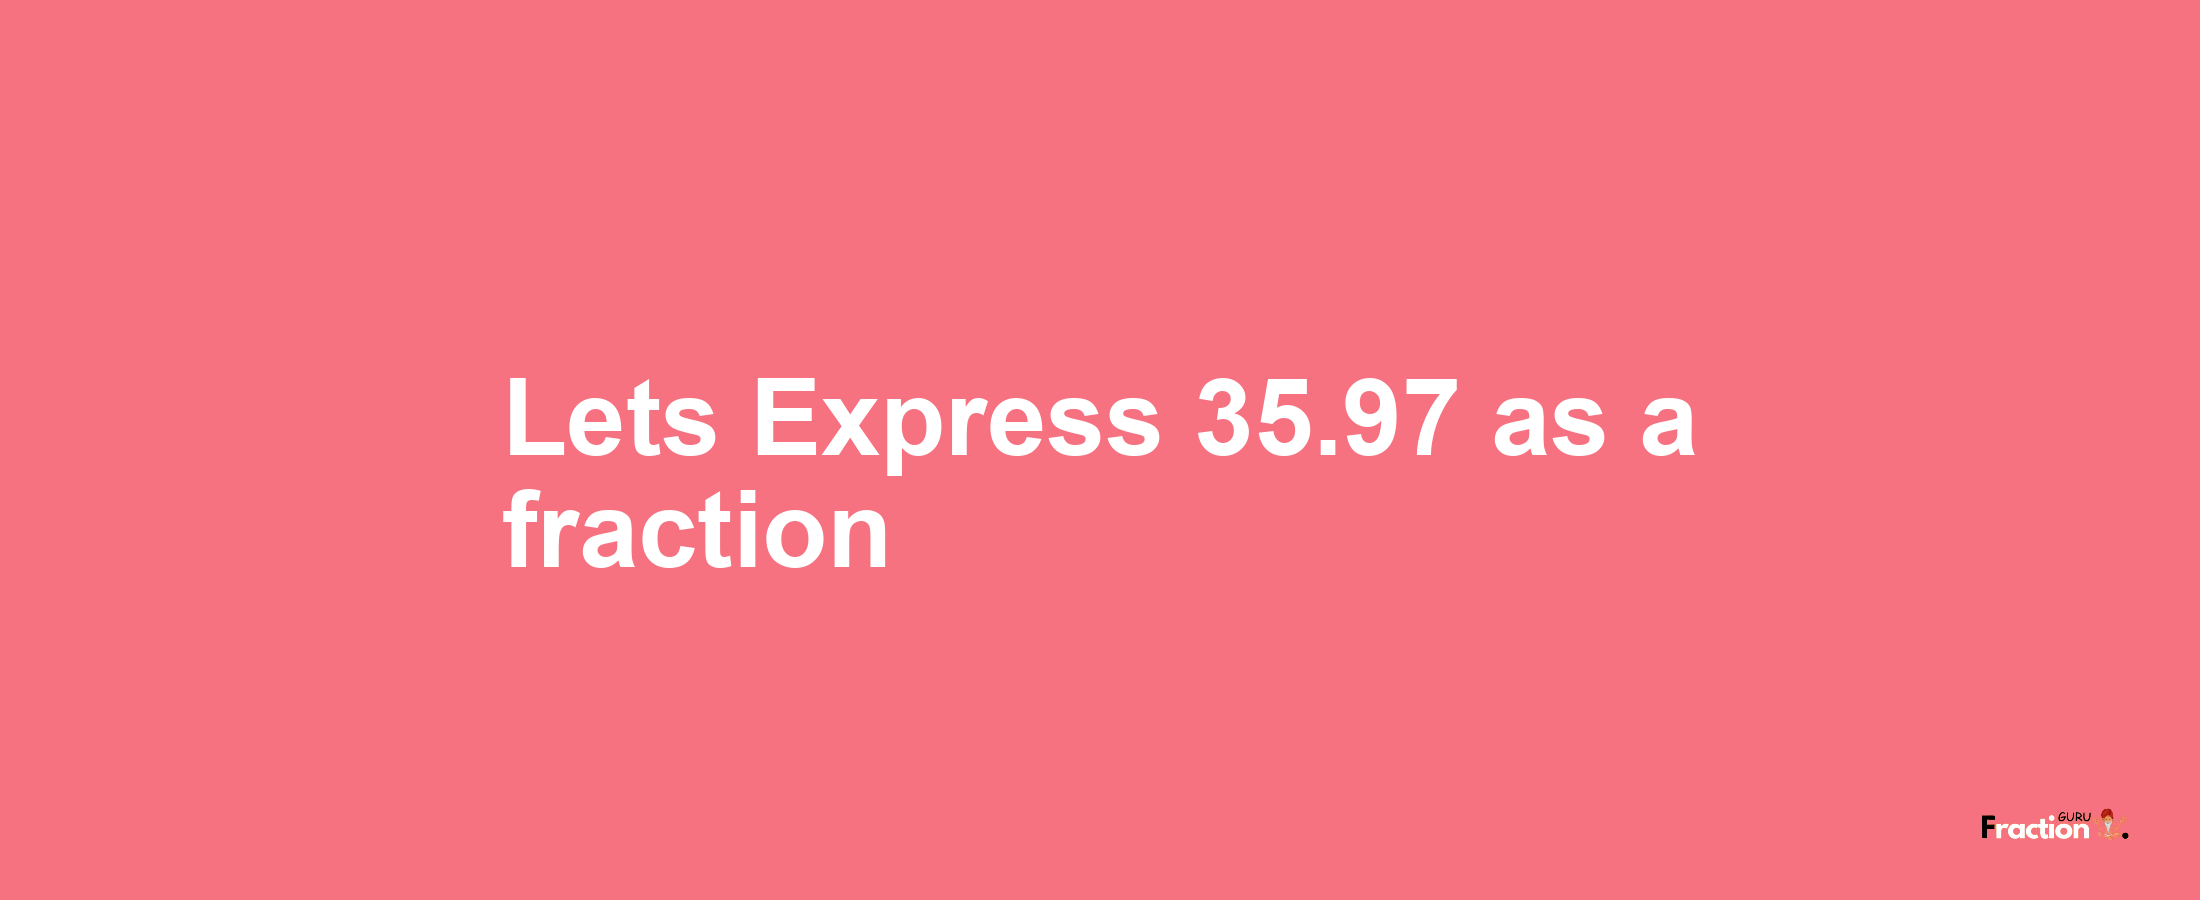 Lets Express 35.97 as afraction